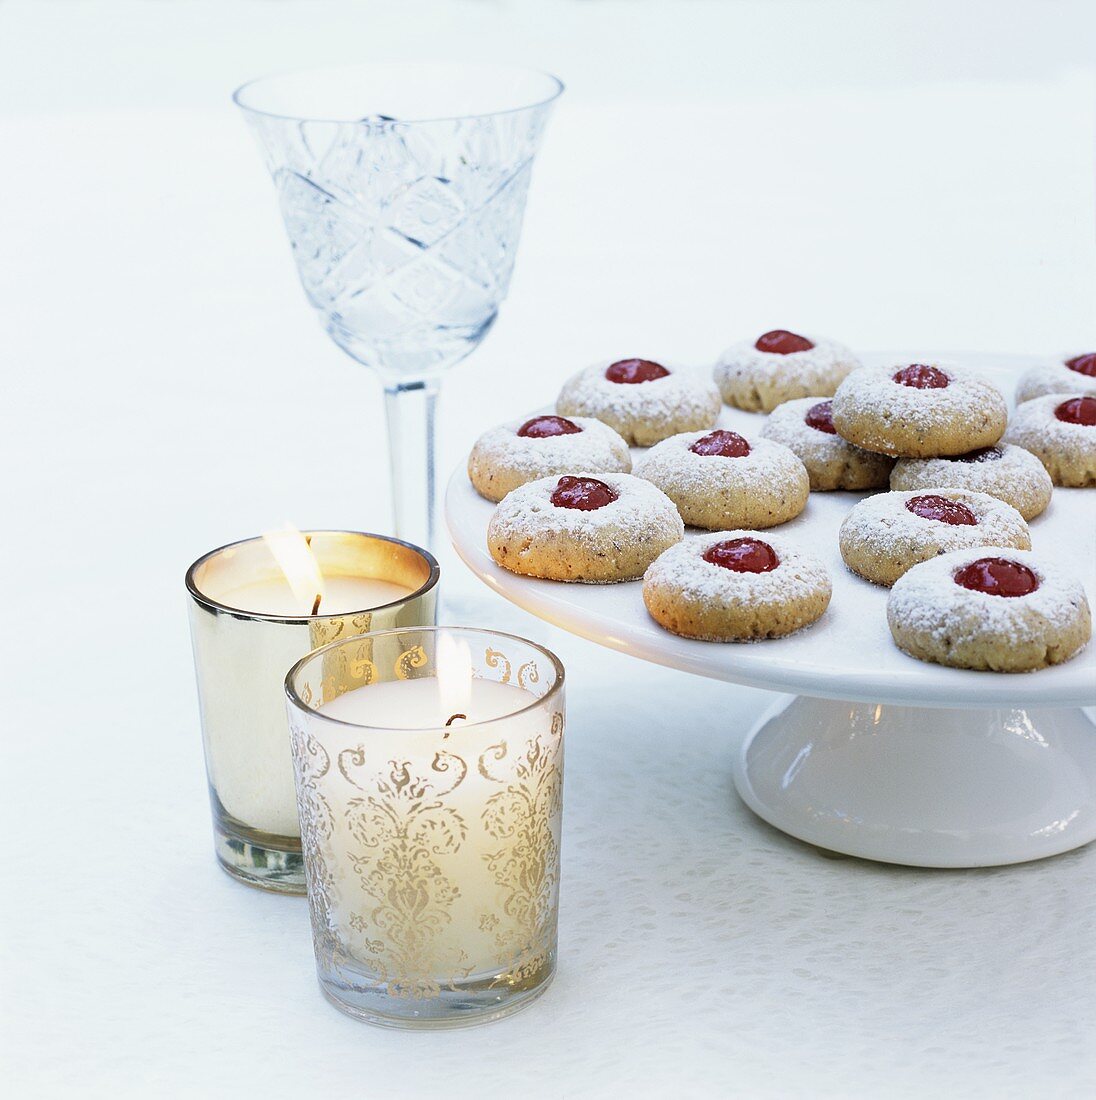 Jam biscuits on a cake stand with candle glasses